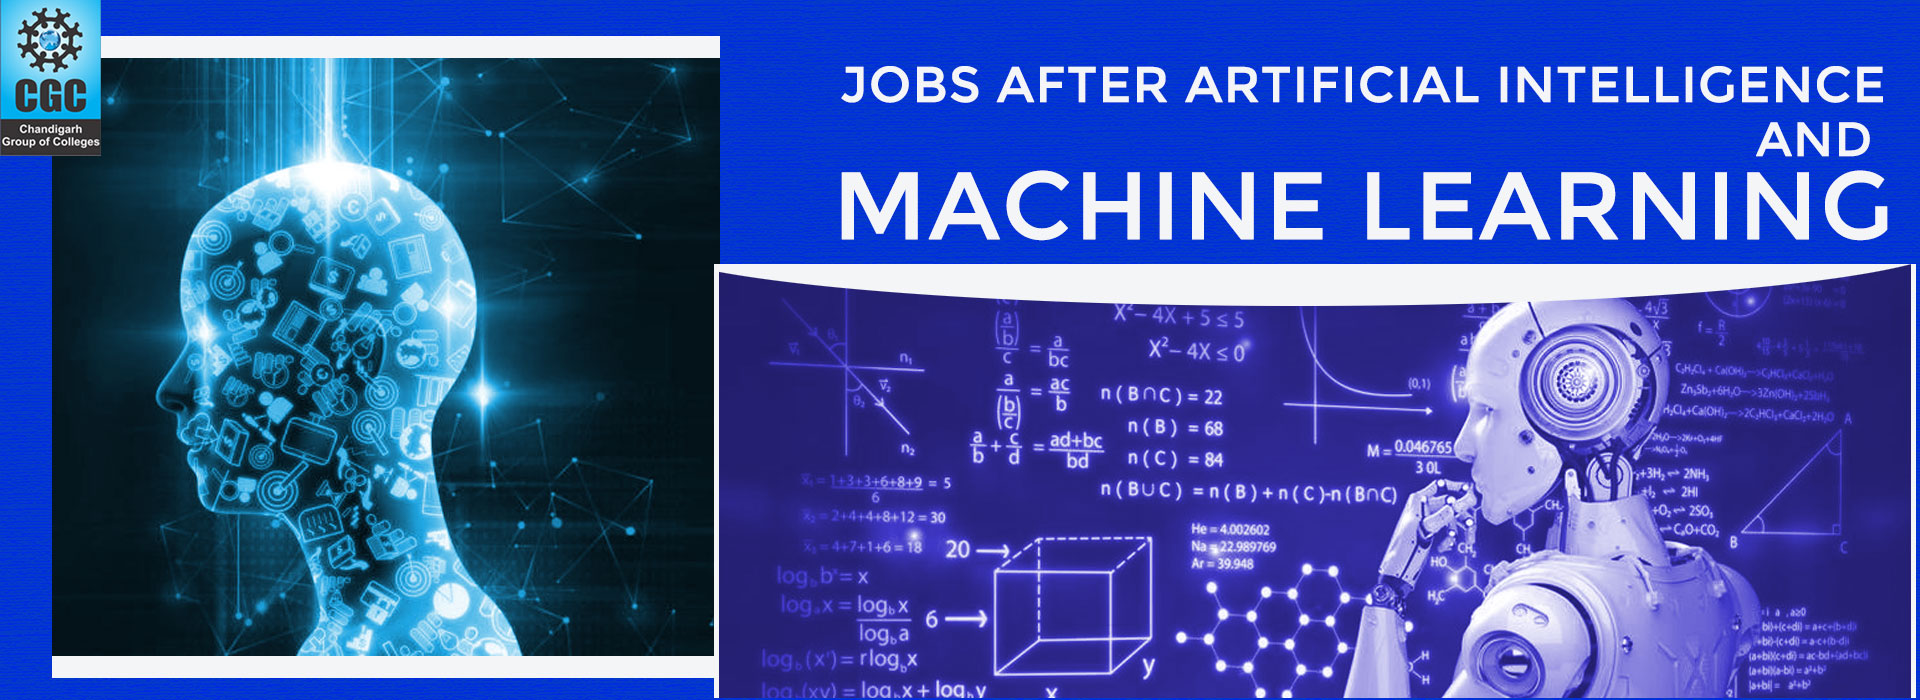 Jobs after Artificial Intelligence and Machine Learning 